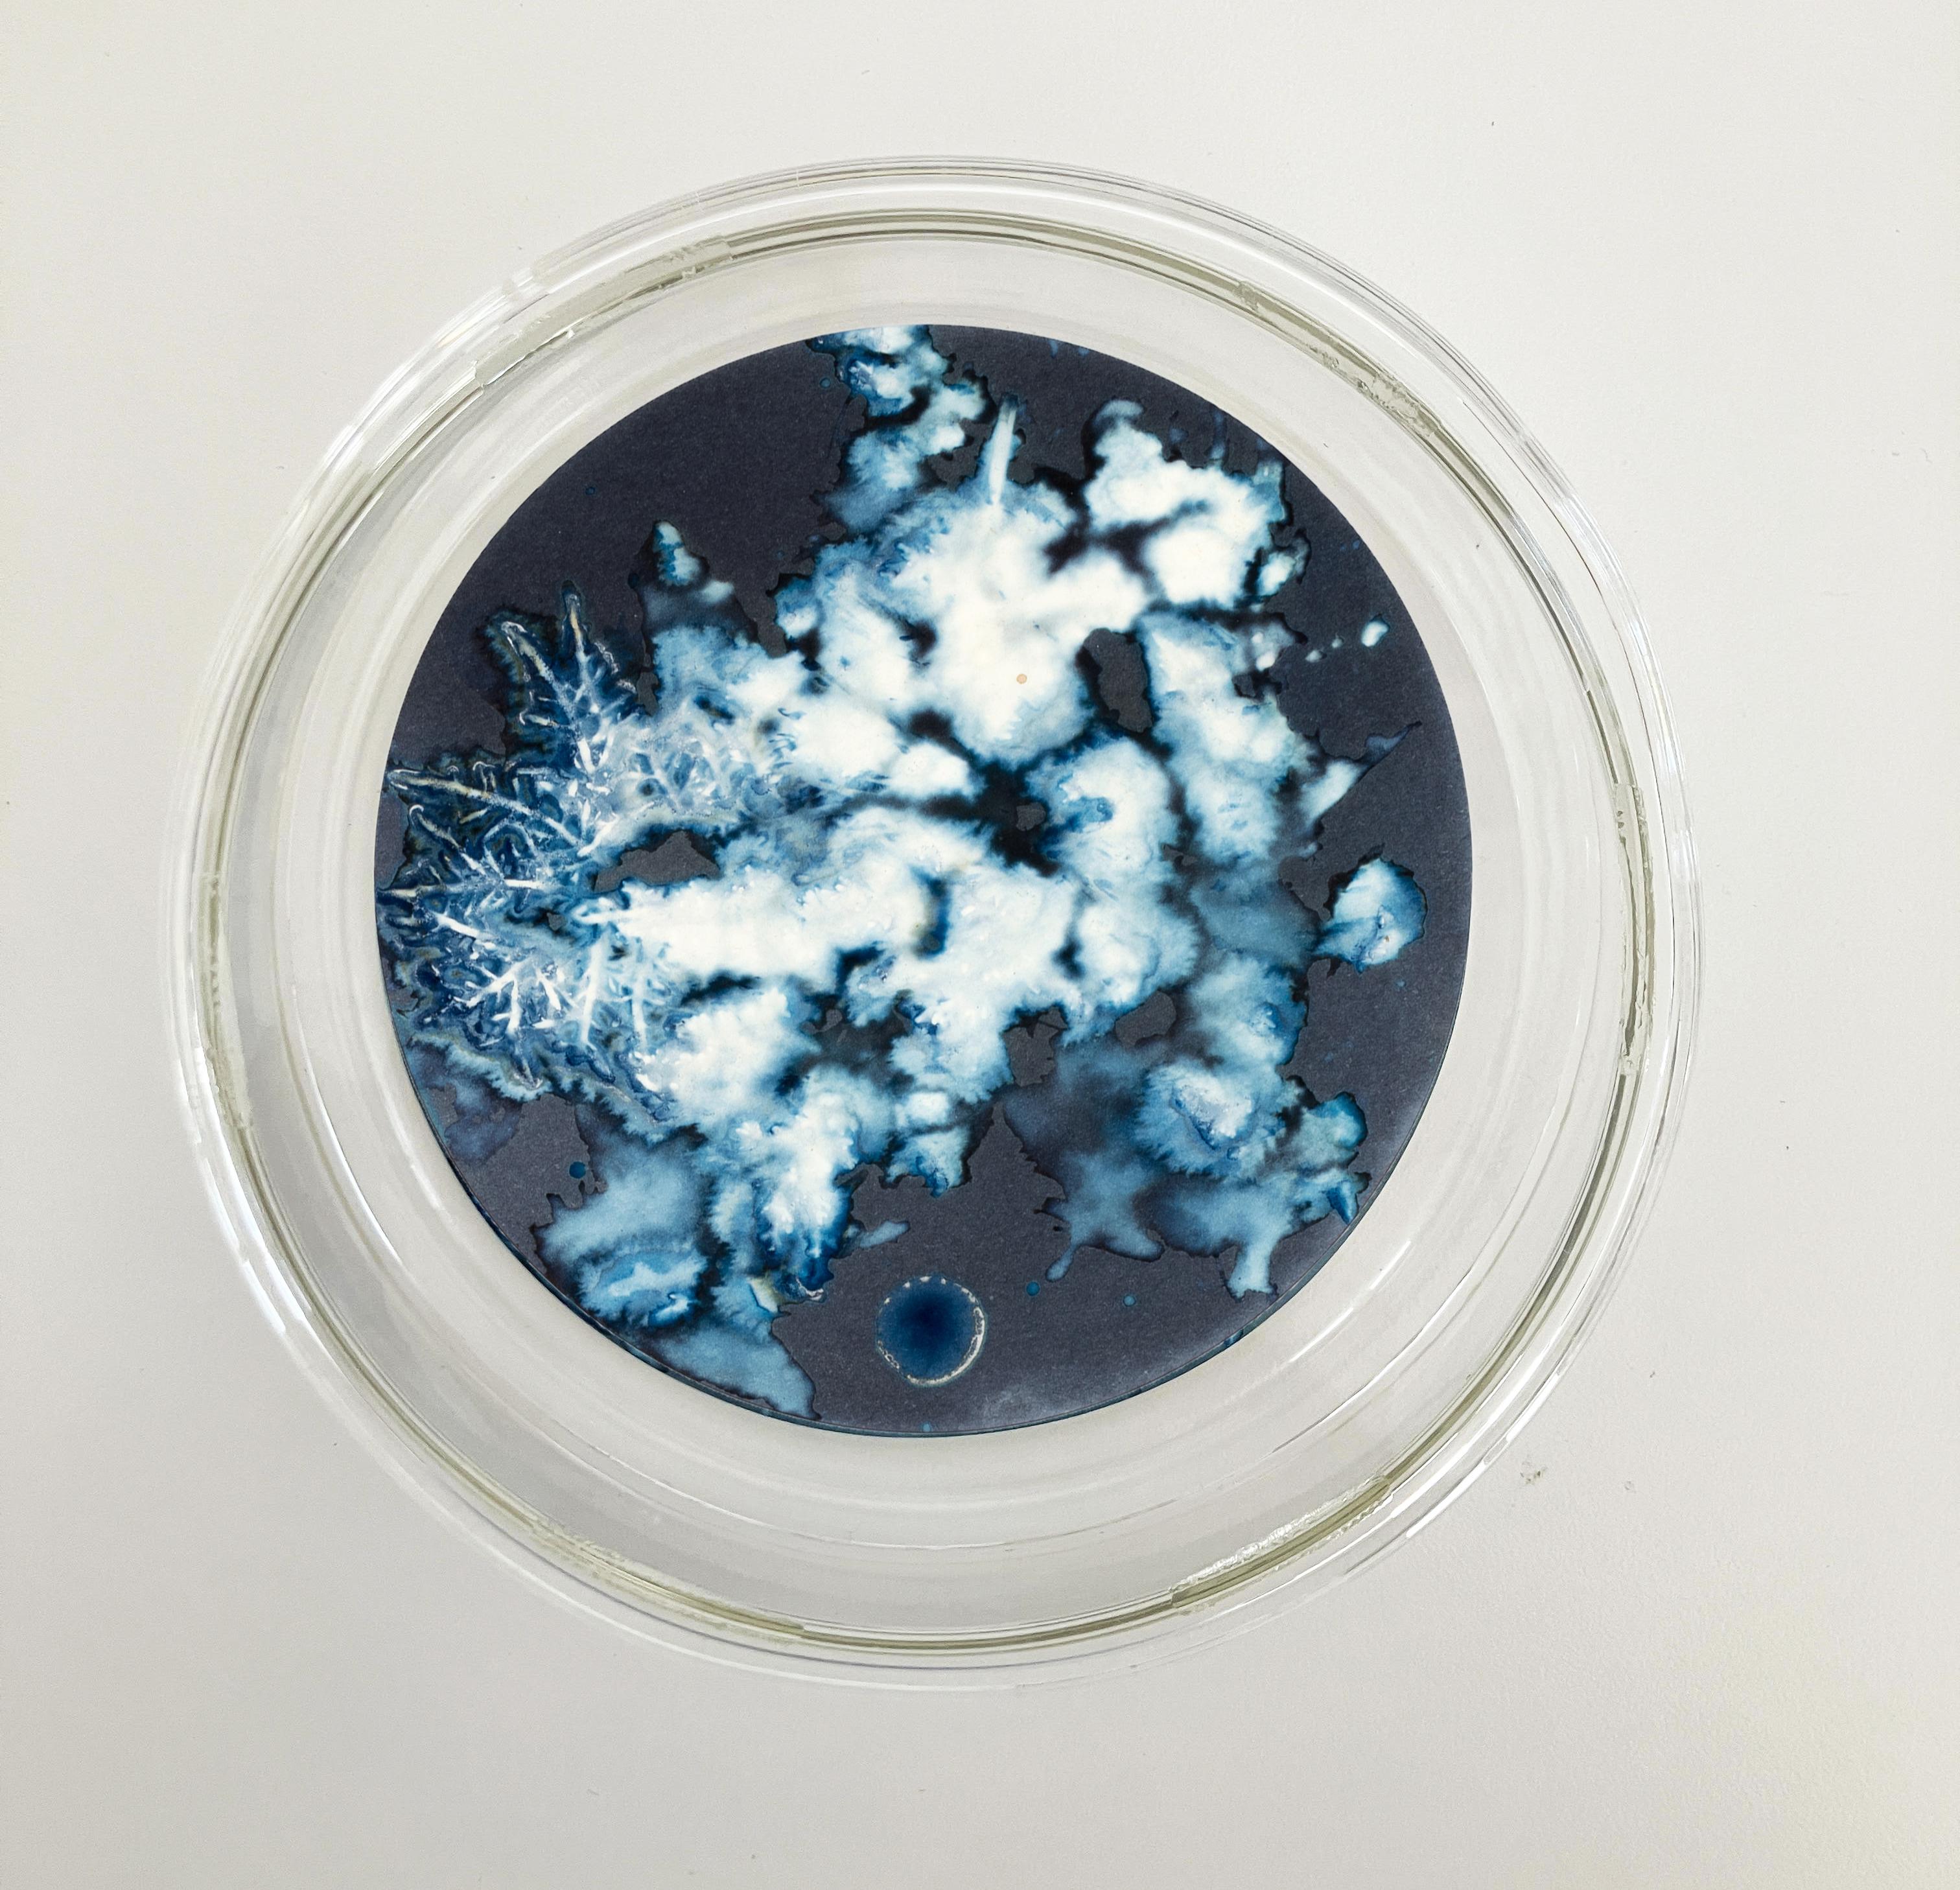 Algas 88, 28, 87, 2022 by Paola Davila 
From the series Mareas
Cyanotype on 300 gr cotton paper
Mounted in a high-resistance borosilicate glass petri dish
Overall size: 36 cm Dm x 12 cm H x 2.4 cm Deep.
Individual Image size: 10.5 cm D. 
Each Petri